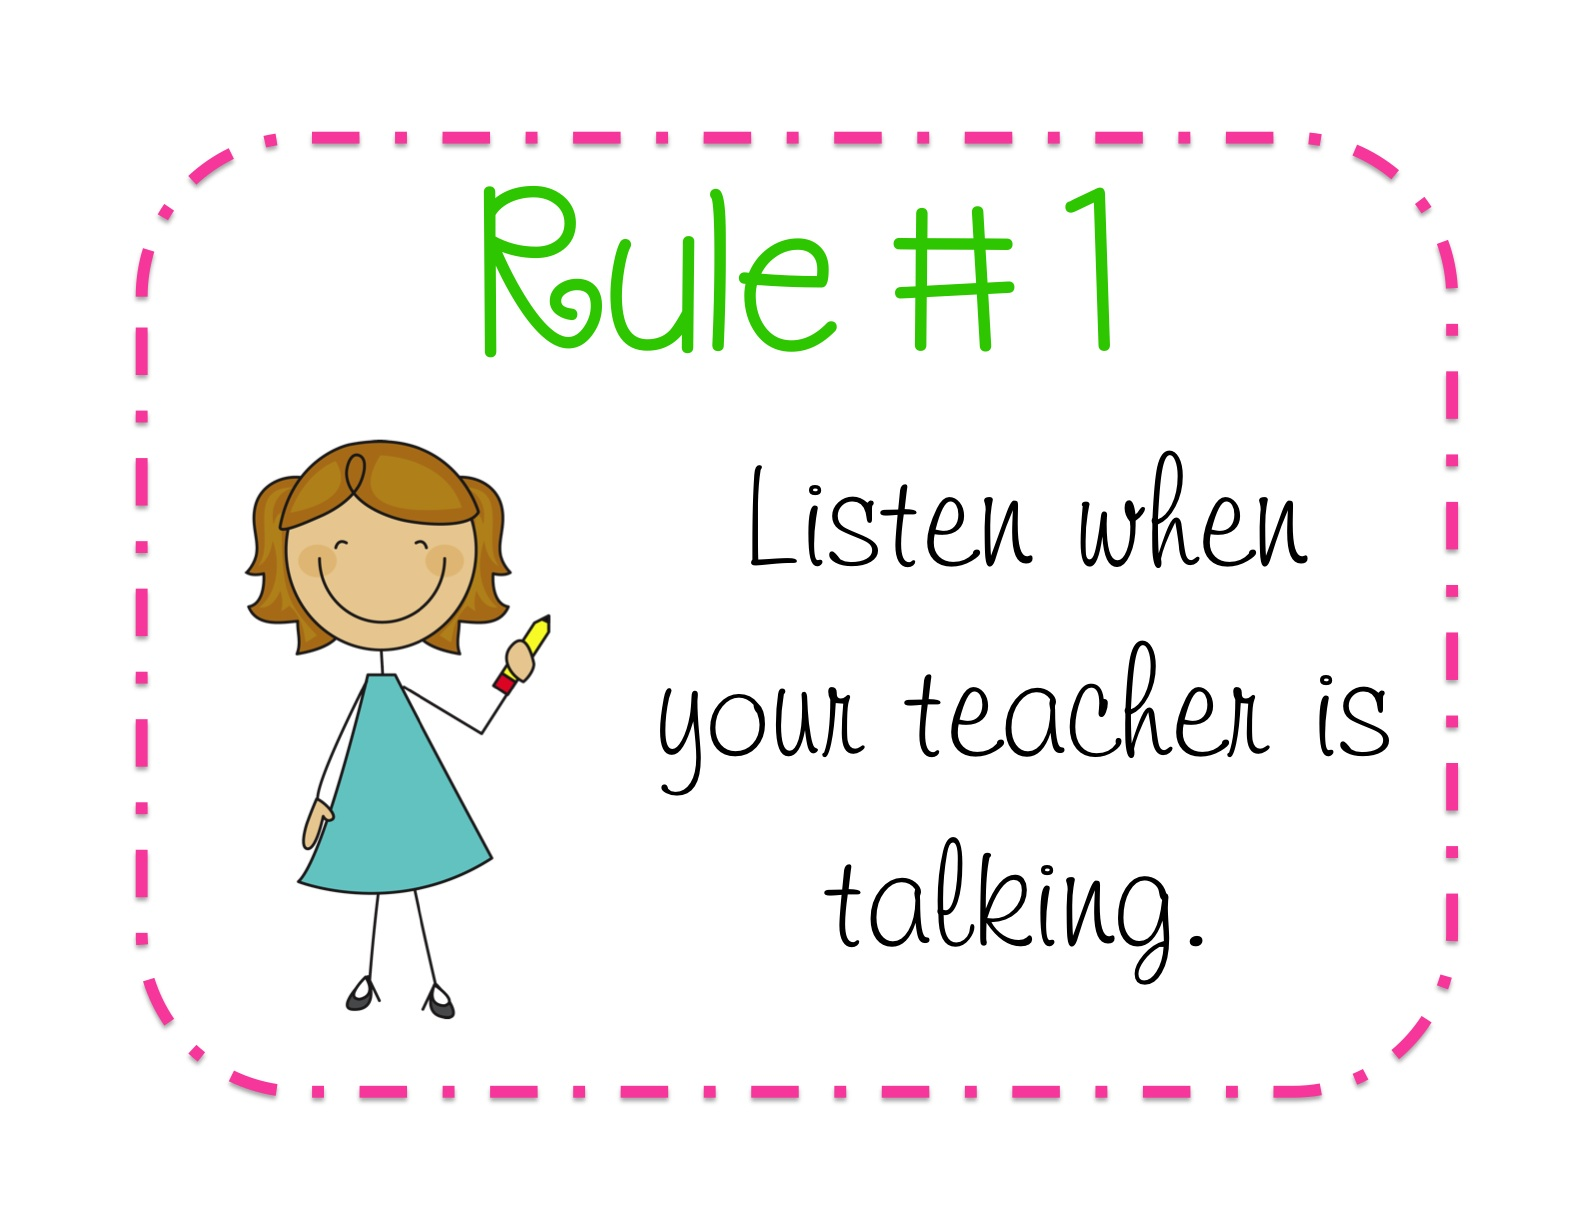 Rules in society. Classroom Rules. Classroom Rules for children. Rules in the Classroom. Classroom Rules for students.